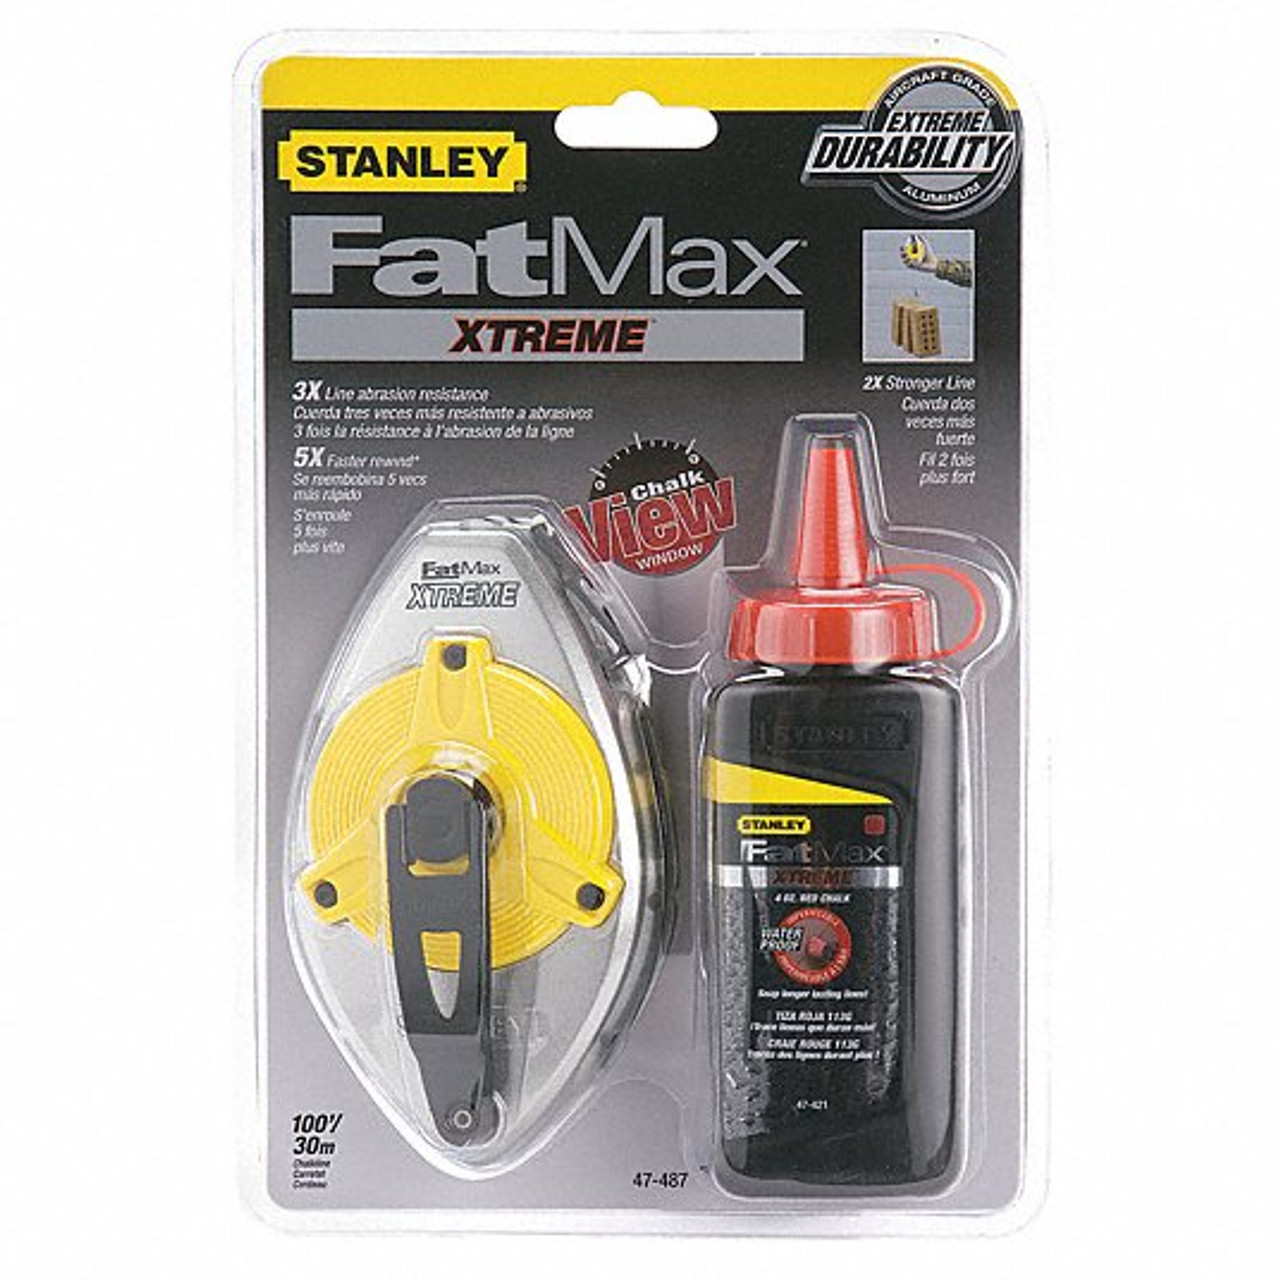 Stanley Products FatMax Xtreme Chalk Line Reel with Red Chalk, 100'  #47-487L (6/Pkg.)